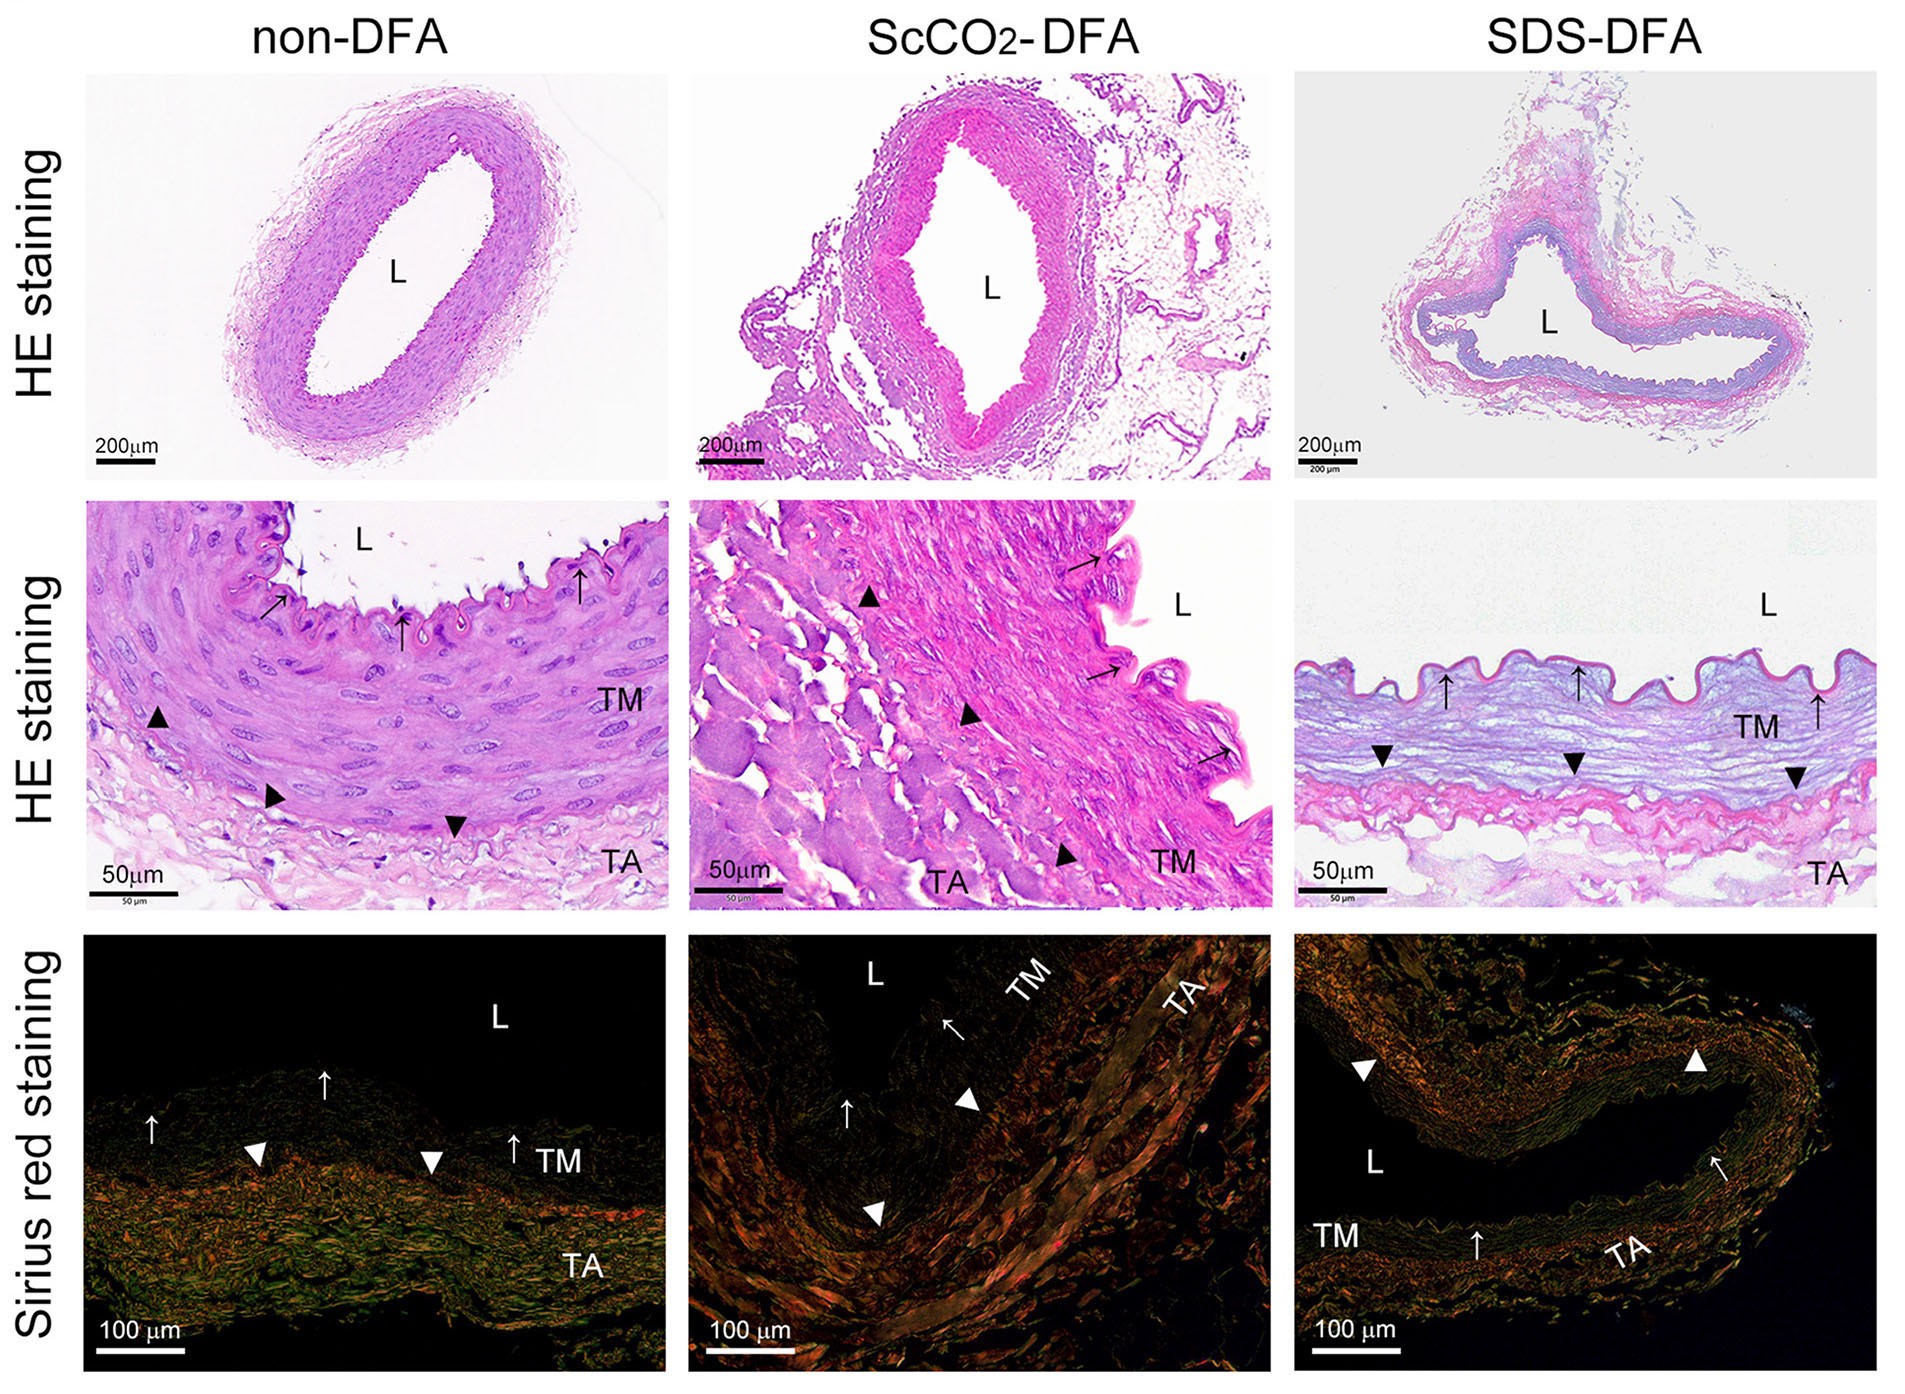 Supercritical carbon dioxide-decellularized arteries exhibit physiologic-like vessel regeneration following xenotraSupercritical carbon dioxide-decellularized arteries exhibit physiologic-like vessel regeneration following xenotransplantation in rats